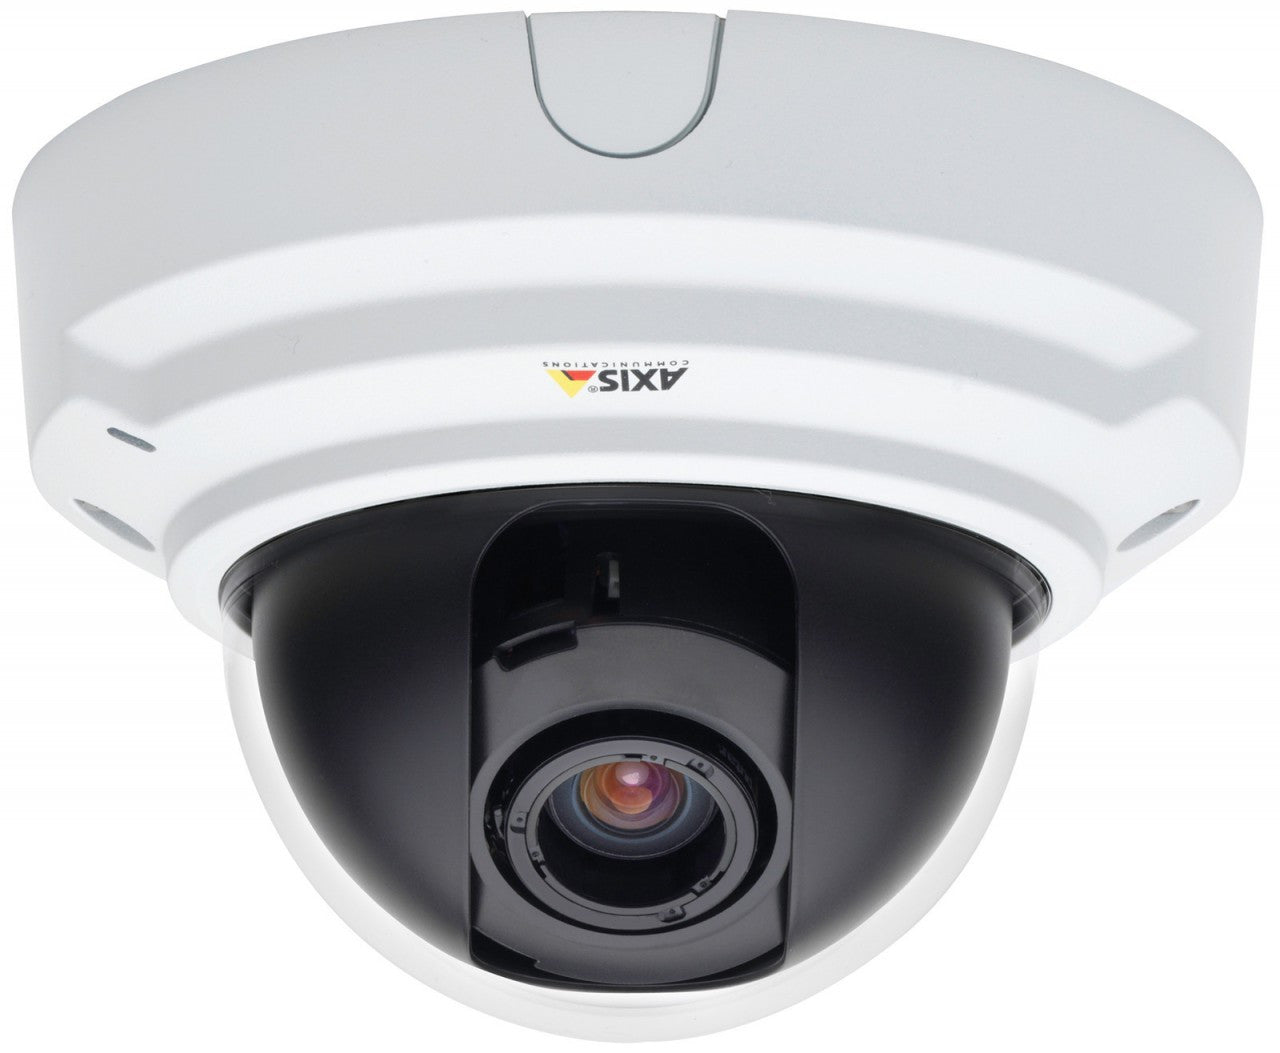 AXIS P3343 (0307-001) Fixed Dome Network IP Camera